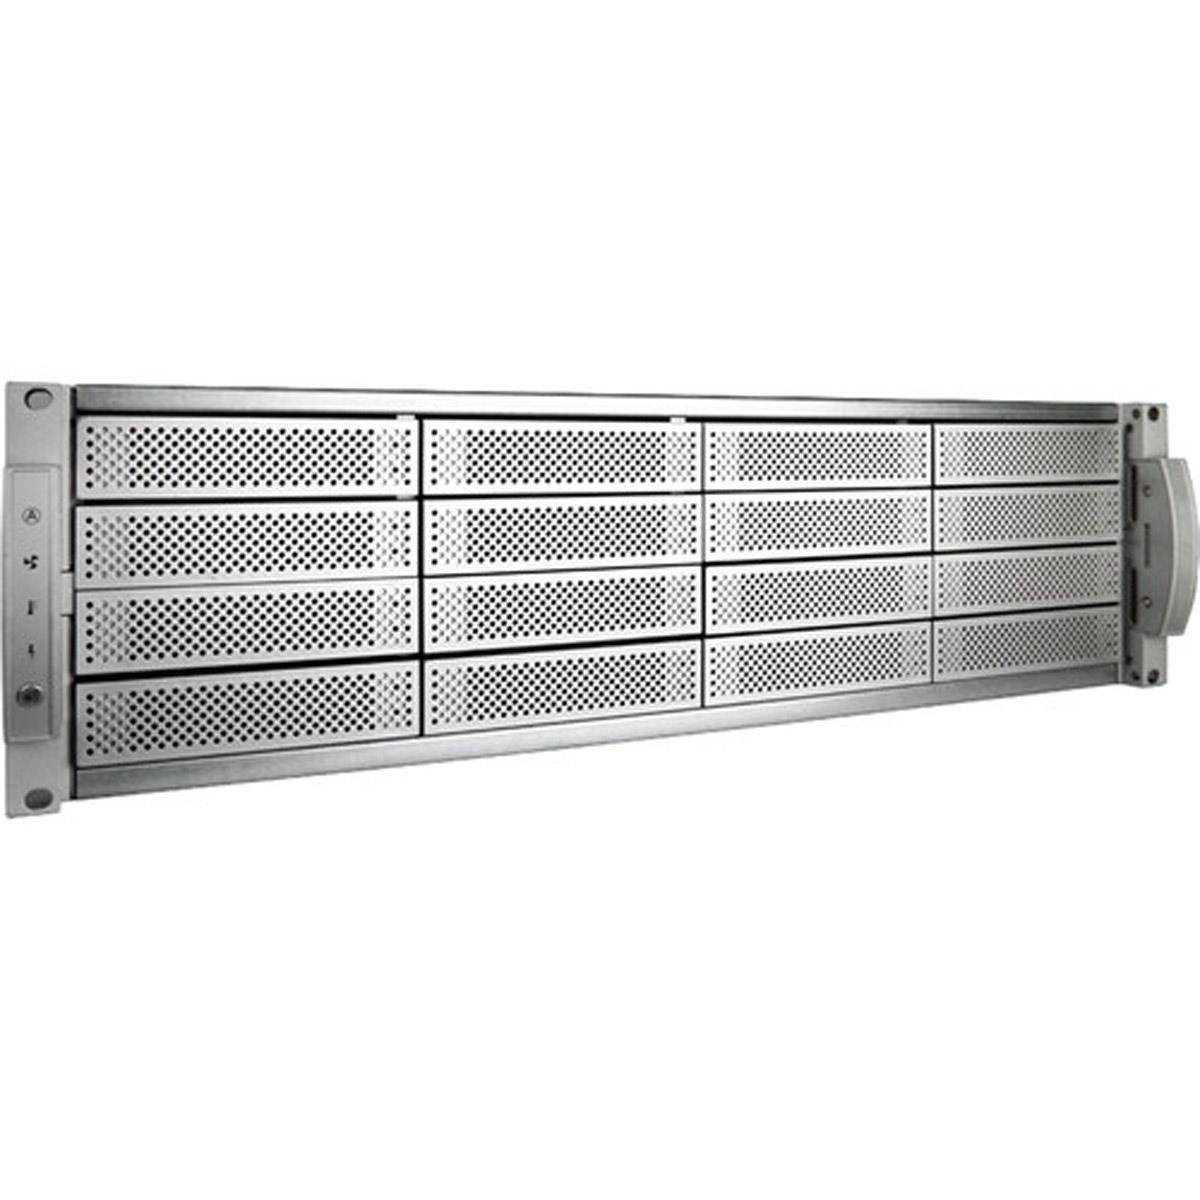 Image of Accusys ExaSAN A16S3-PS 16-Bay PCIe 3.0 Rackmount RAID System